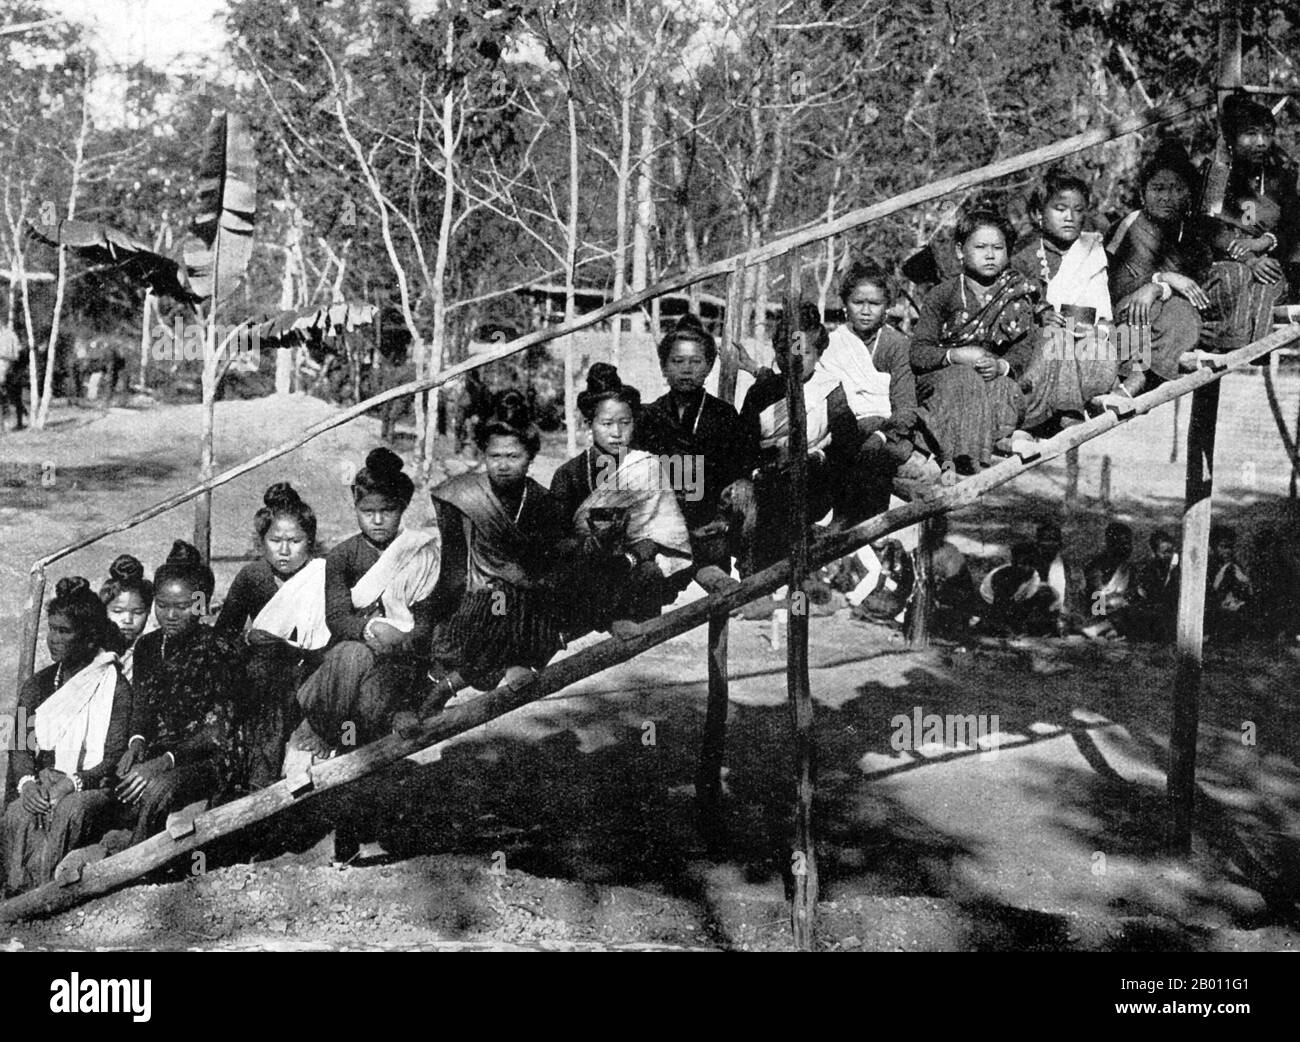 Thailand: Young northern Thai women pose for a photograph on a wooden stairway, c. 1900.  Known to the central Siamese as the Lao States at the turn of the 20th century, the northern region of what is now Thailand was an independent region known as the Lanna kingdom. The main city, Chiang Mai, was built in 1296 by King Mengrai. The city was abandoned in 1776—91 due to Burmese invasions, but became an acknowledged part of Siam around the same time. The north was linked to Bangkok only by river, a journey which could take some six months until, in 1922, a railway was completed. Stock Photo